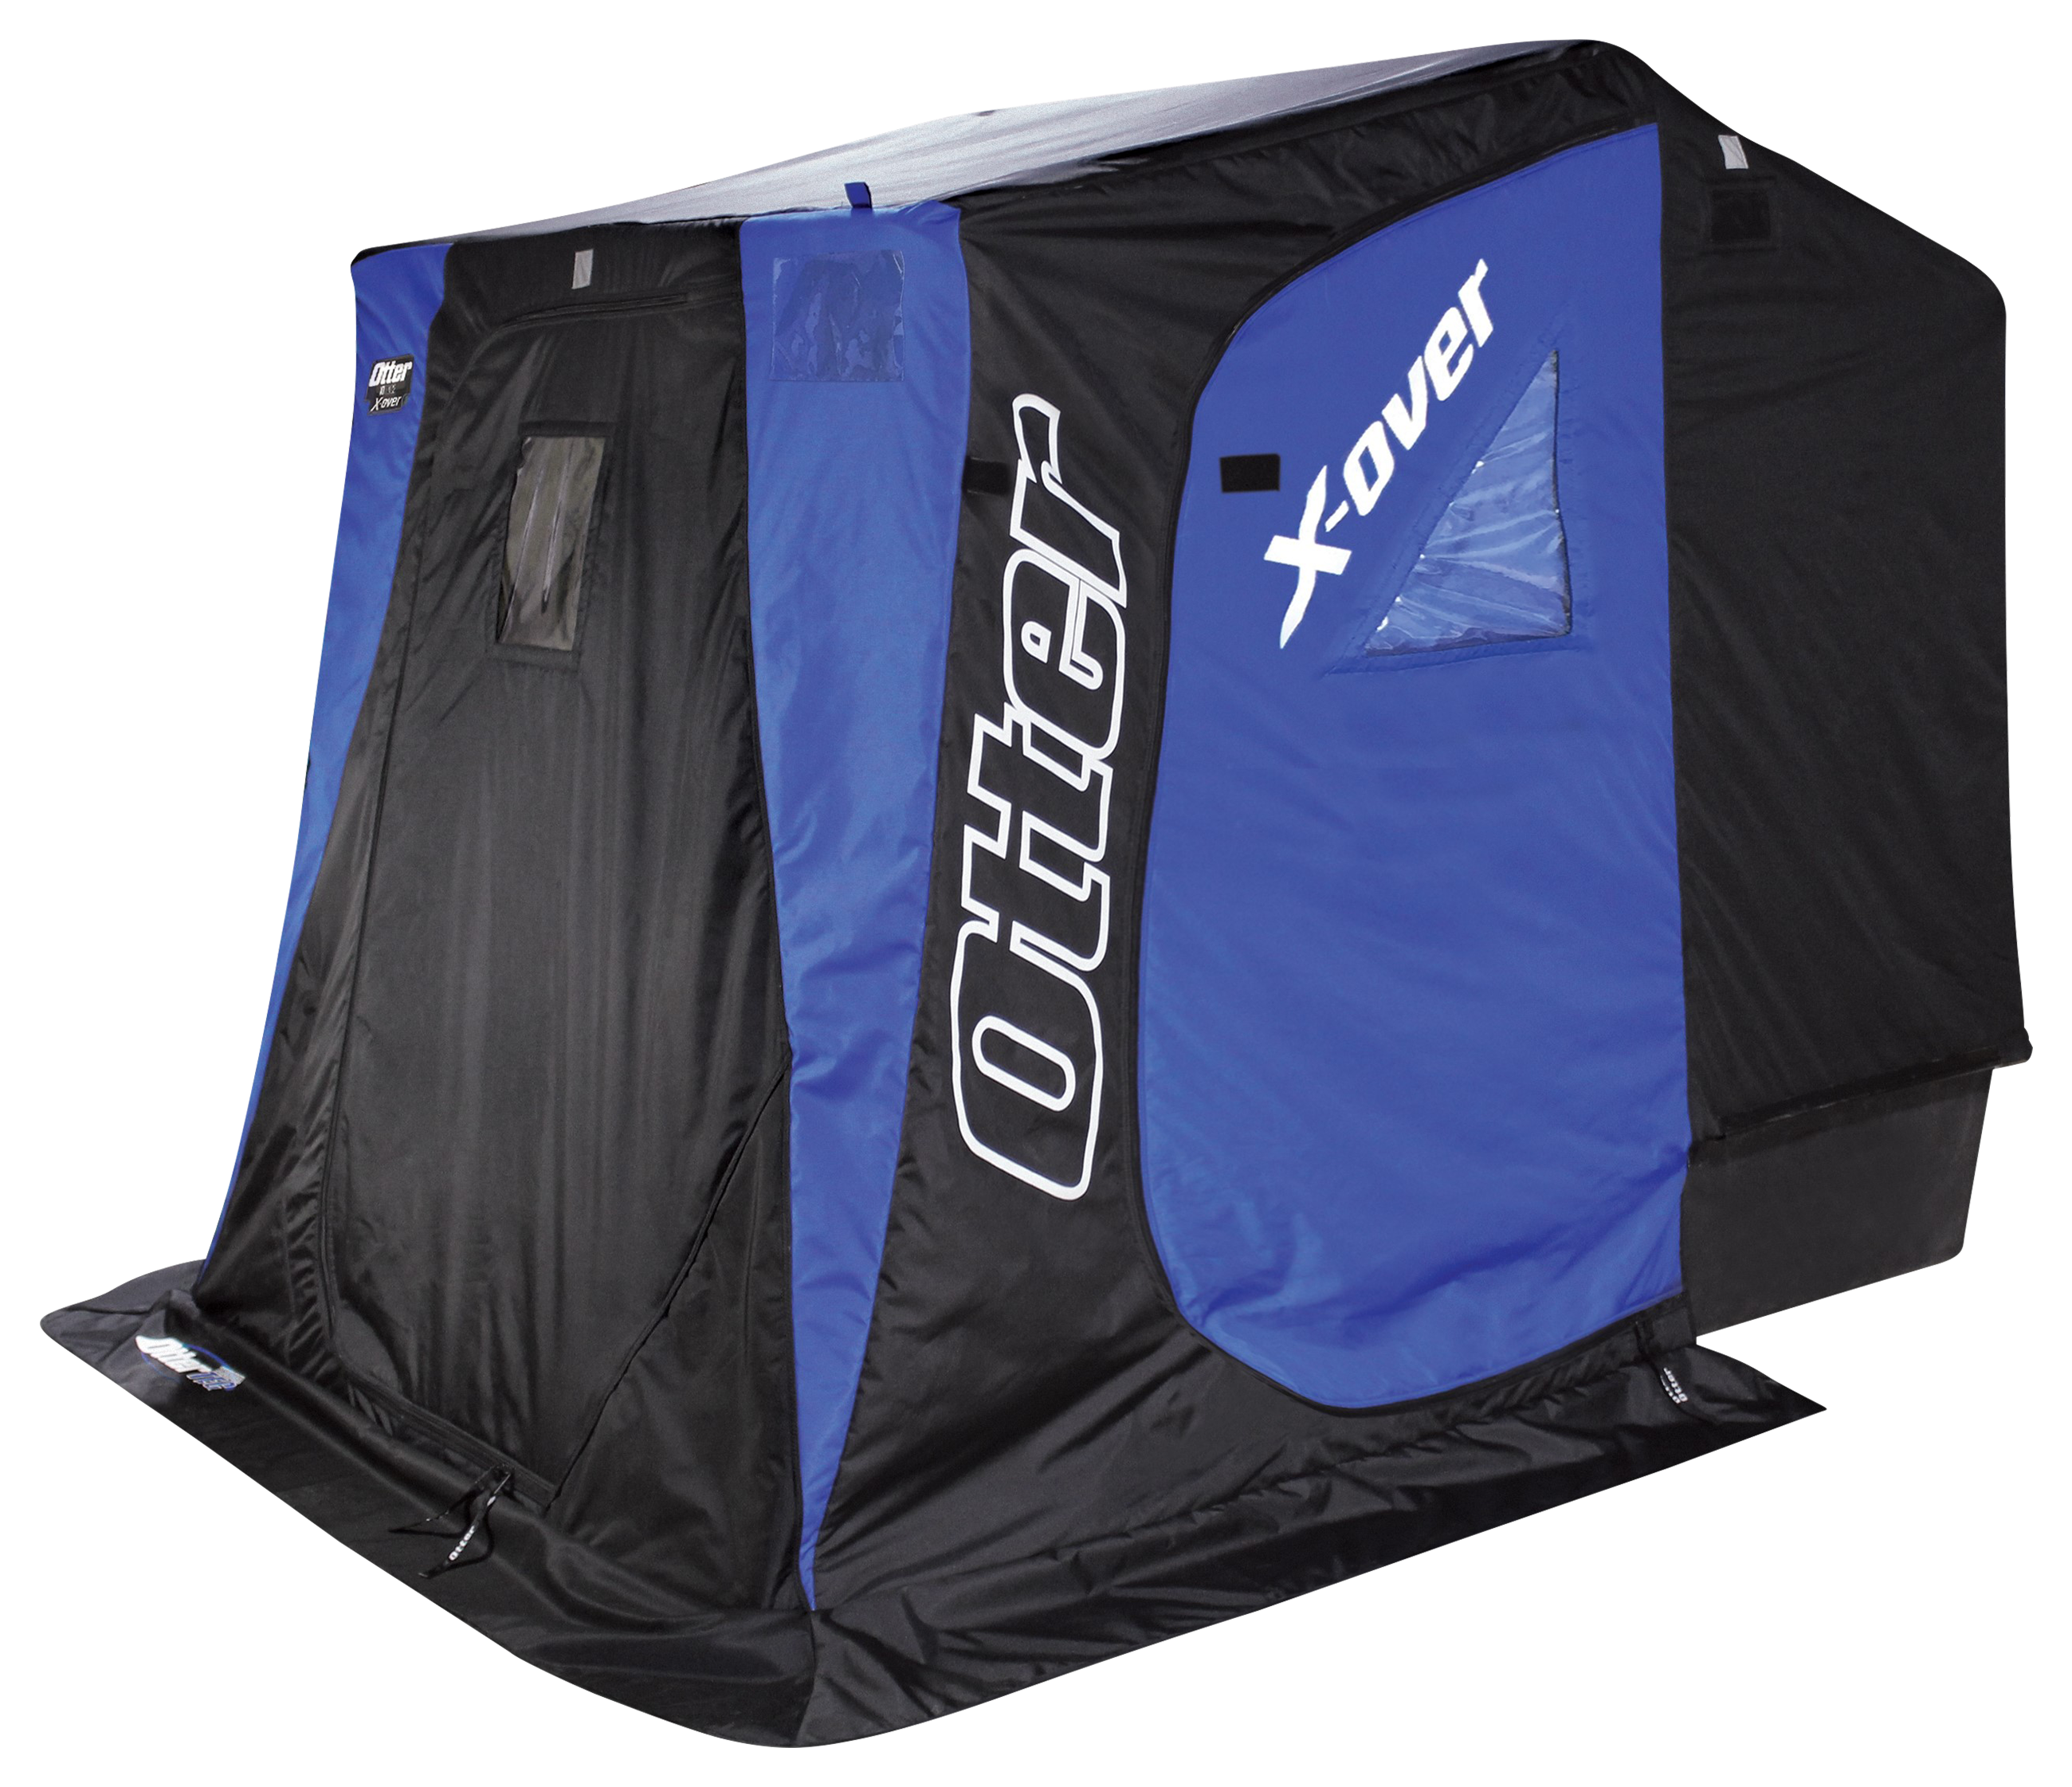 Otter Outdoors XT X-Over Lodge Ice Shelter